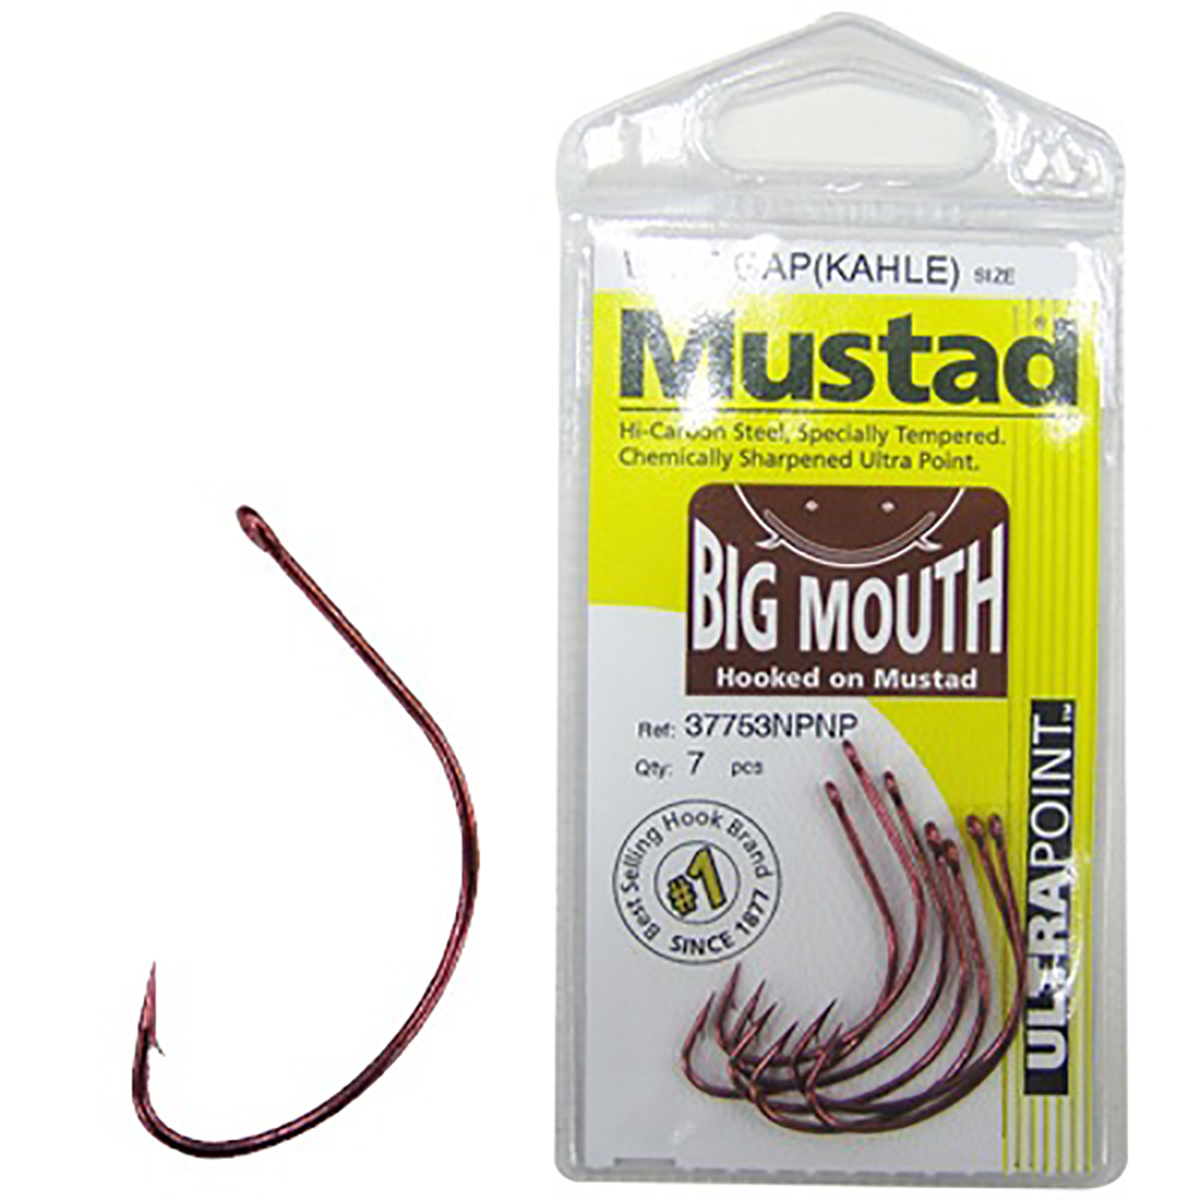 Mustad Big Mouth Hooks 6 9 Pack